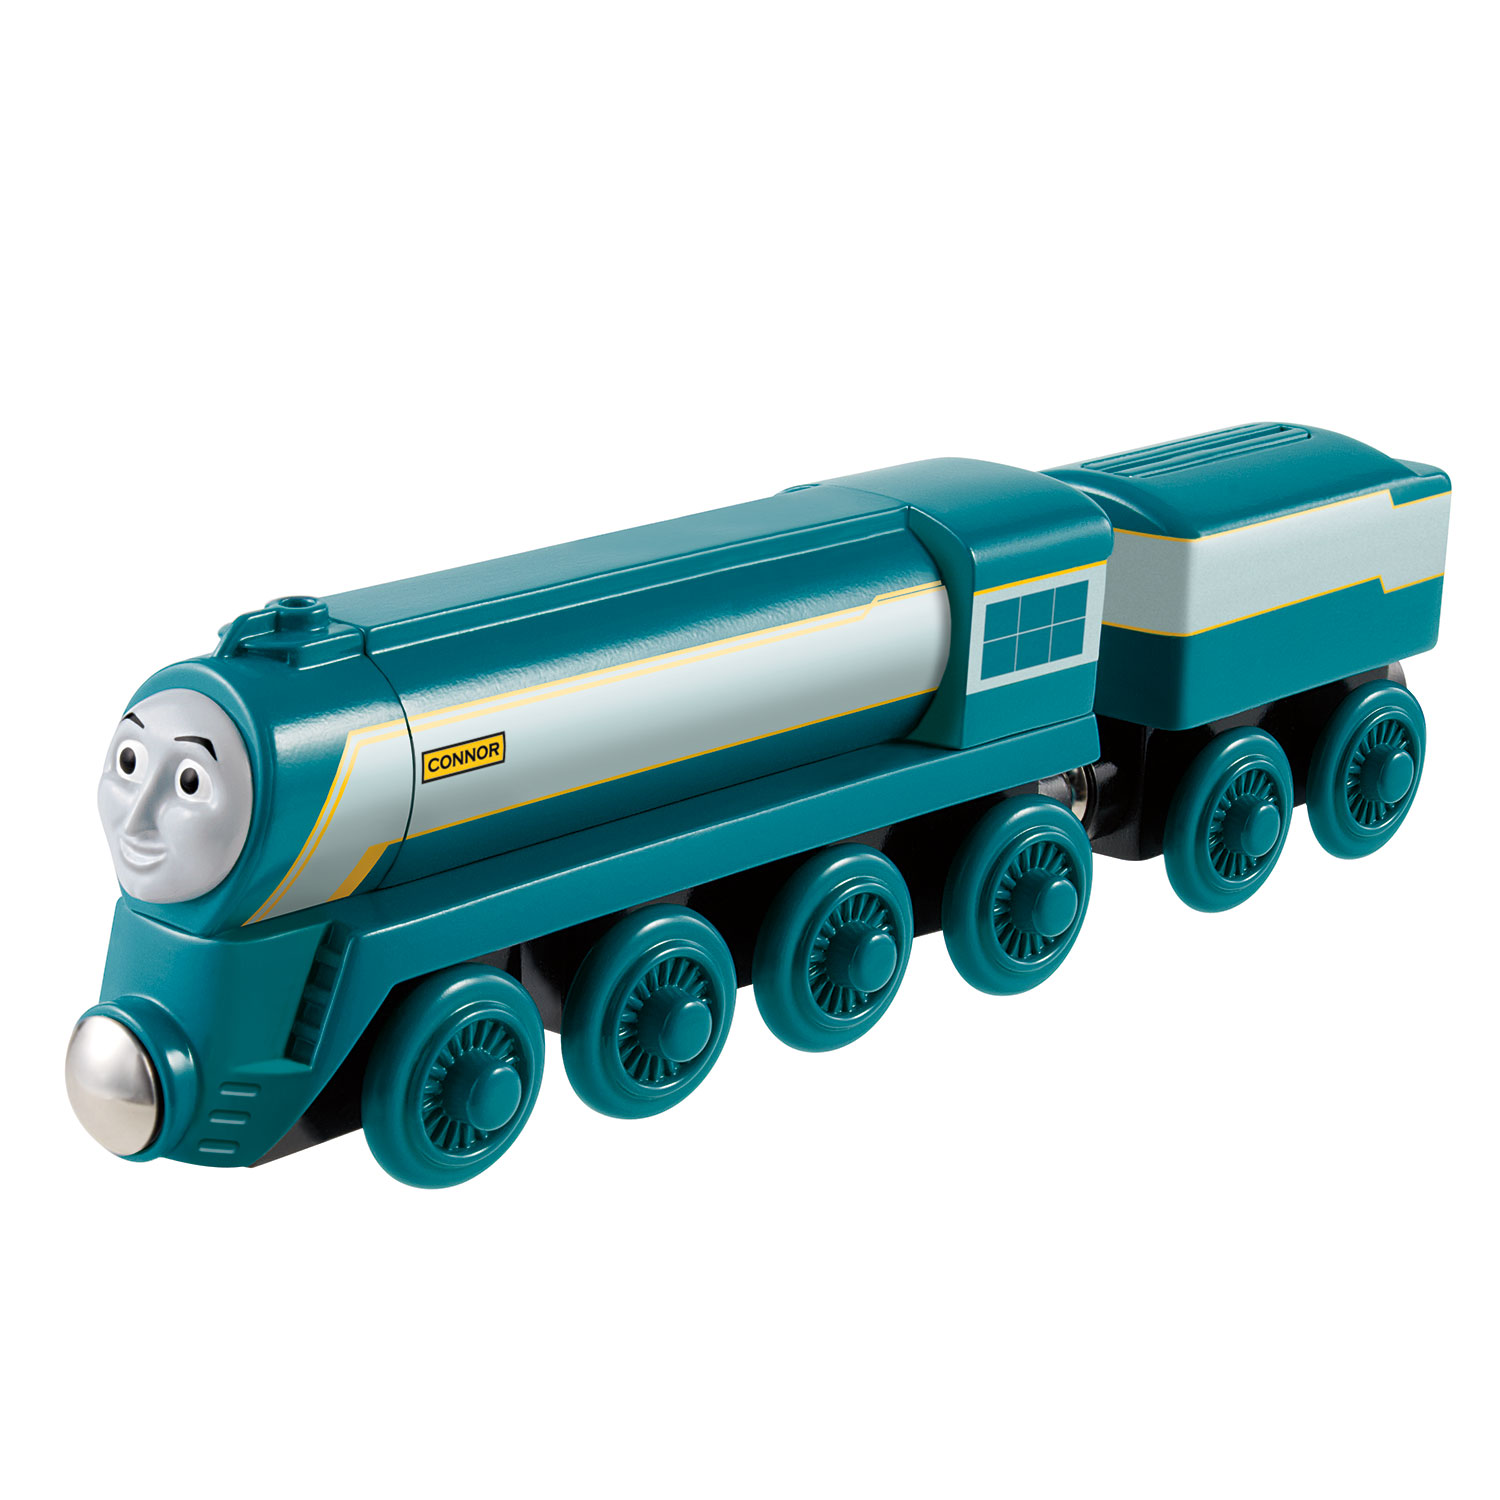 in stand houden Sanders operator Thomas de Trein Connor Engine | Thimble Toys